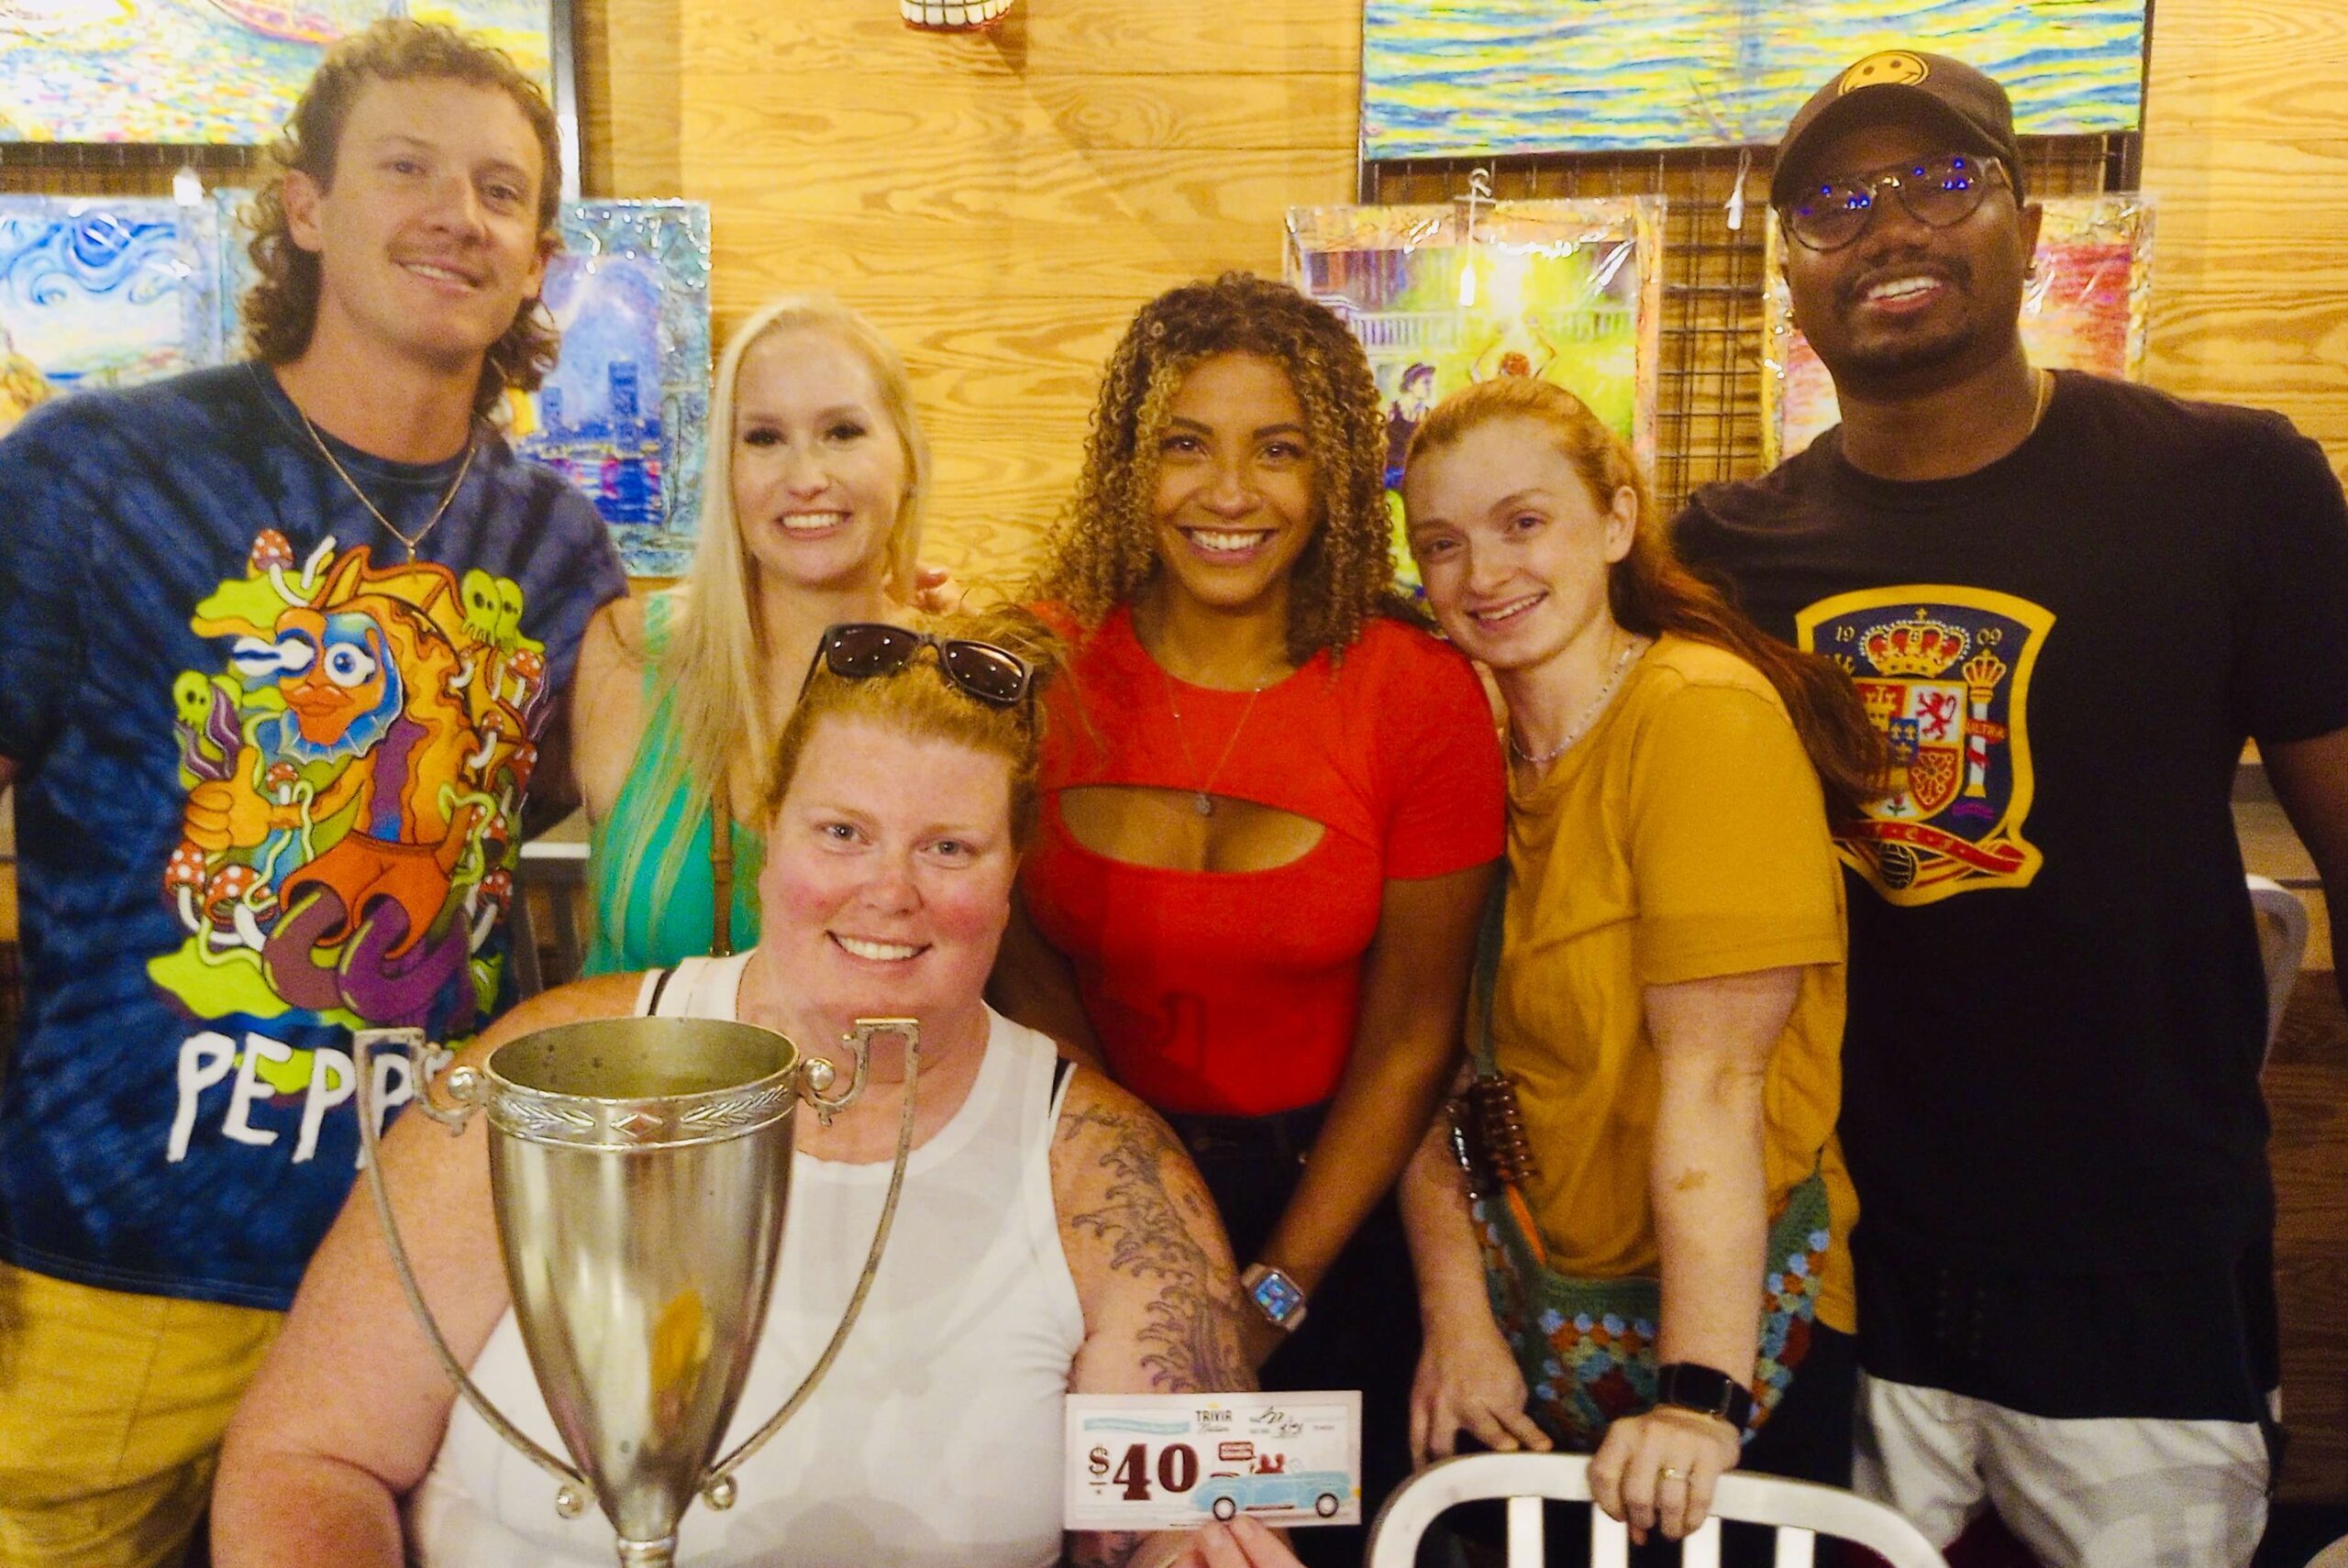 Burrito Gallery Jacksonville FL 32202 trivia night: group of diverse young people both men and women standing together smiling with the woman in front seated behind a trophy and holding up a $40 trivia coupon